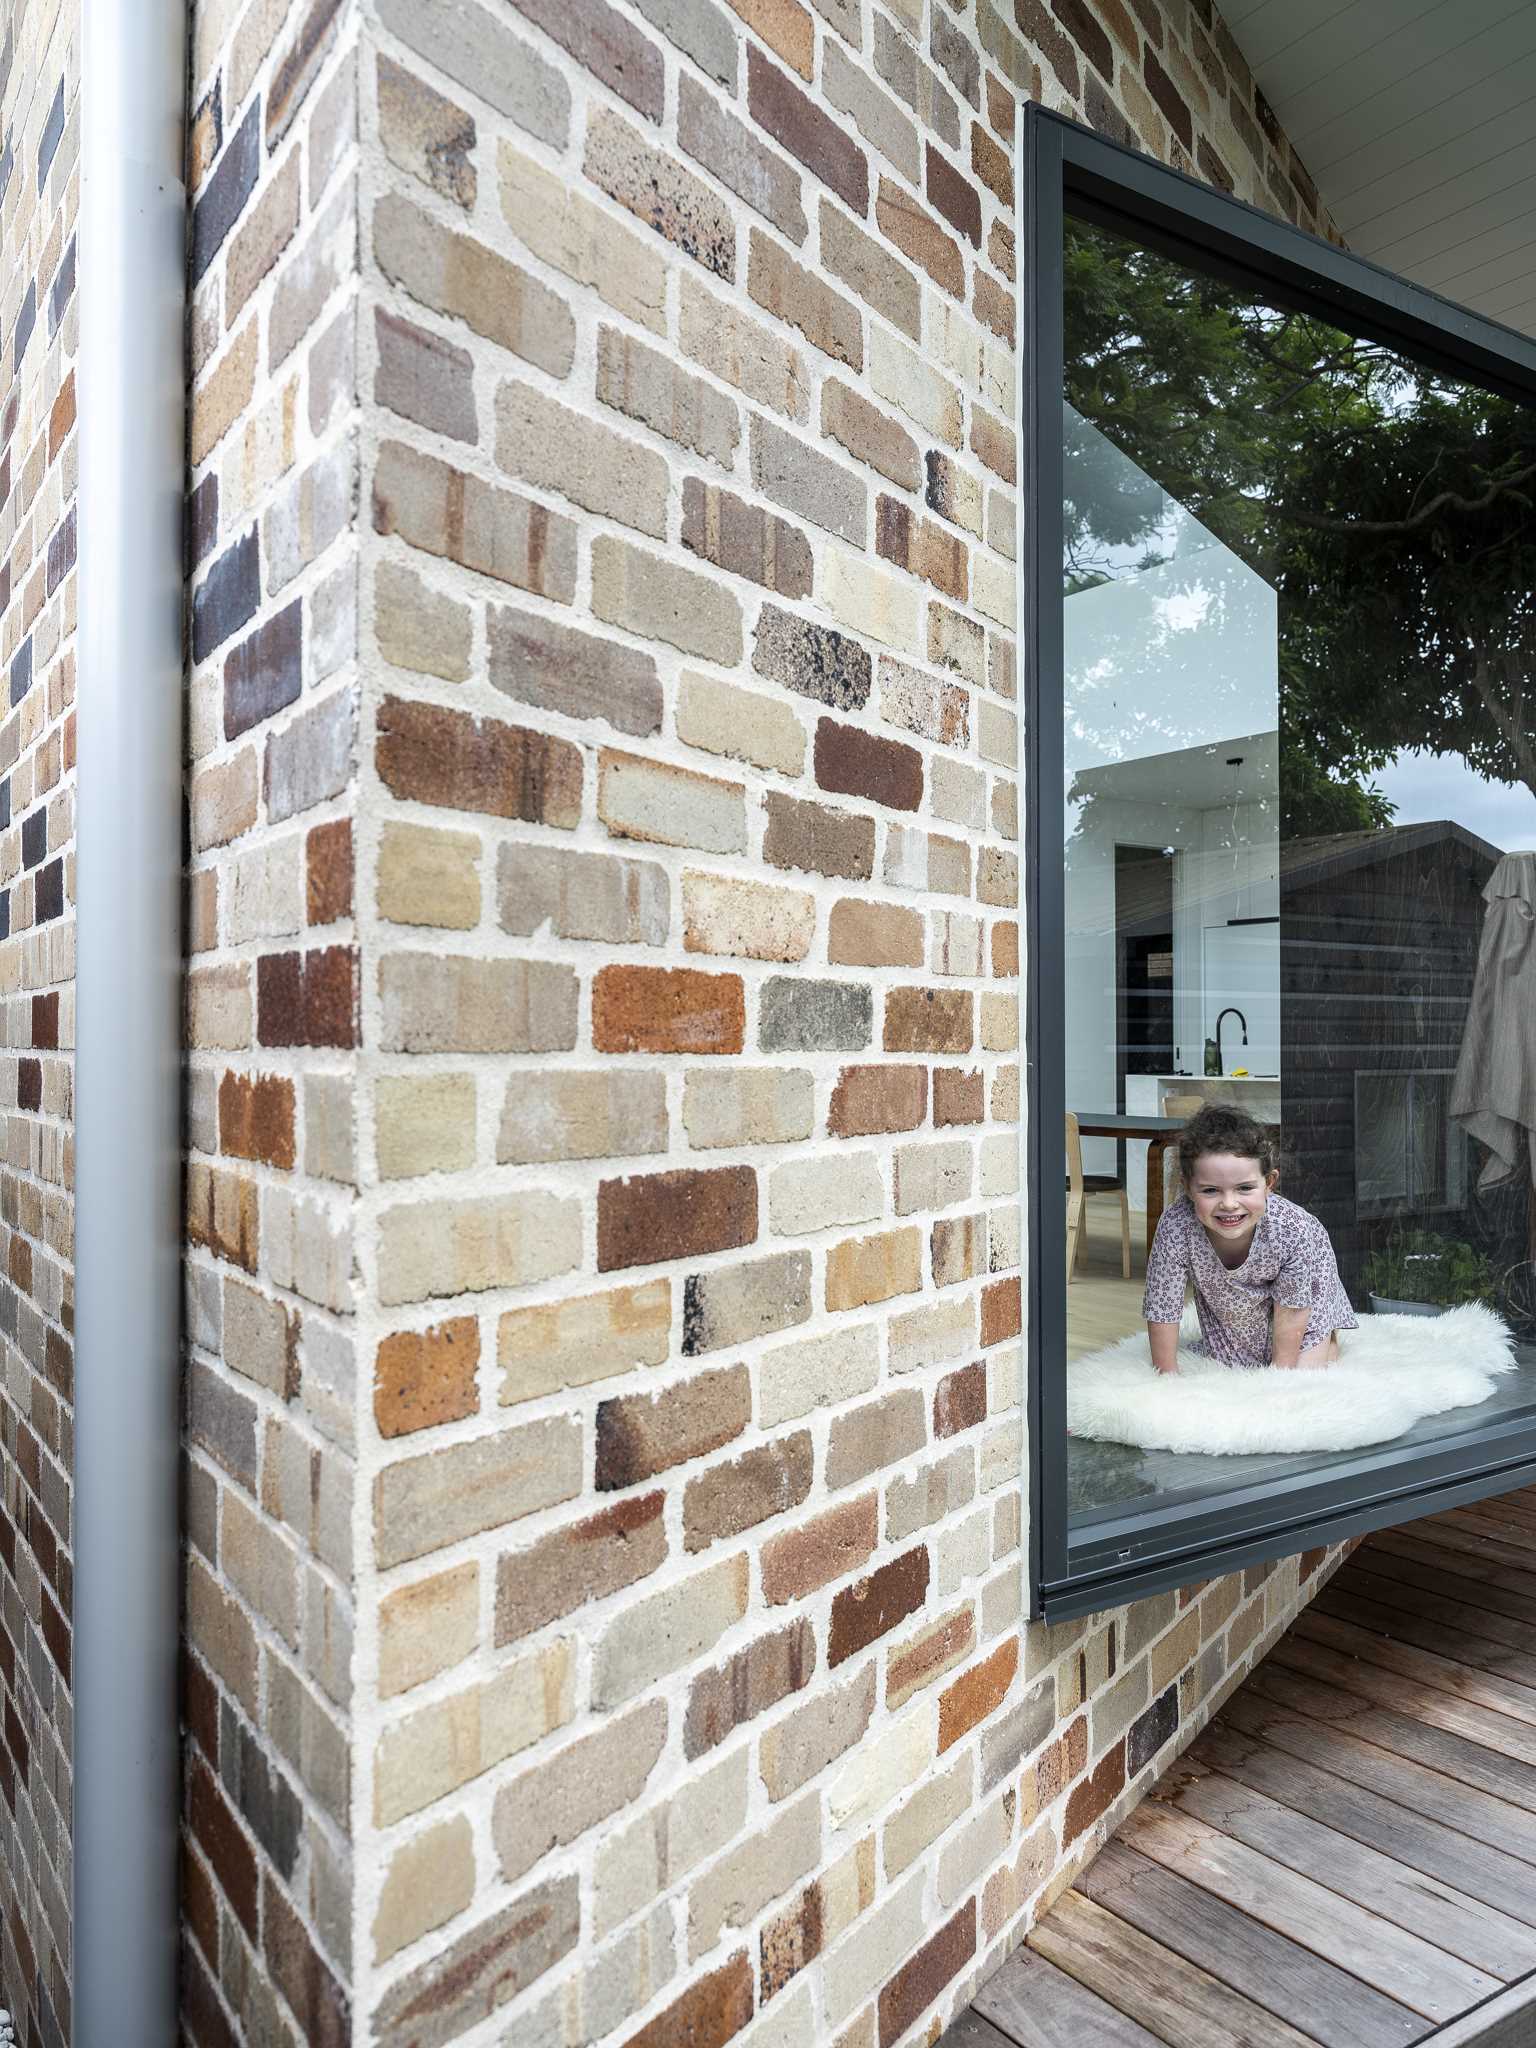 A recycled brick addition with a window seat.